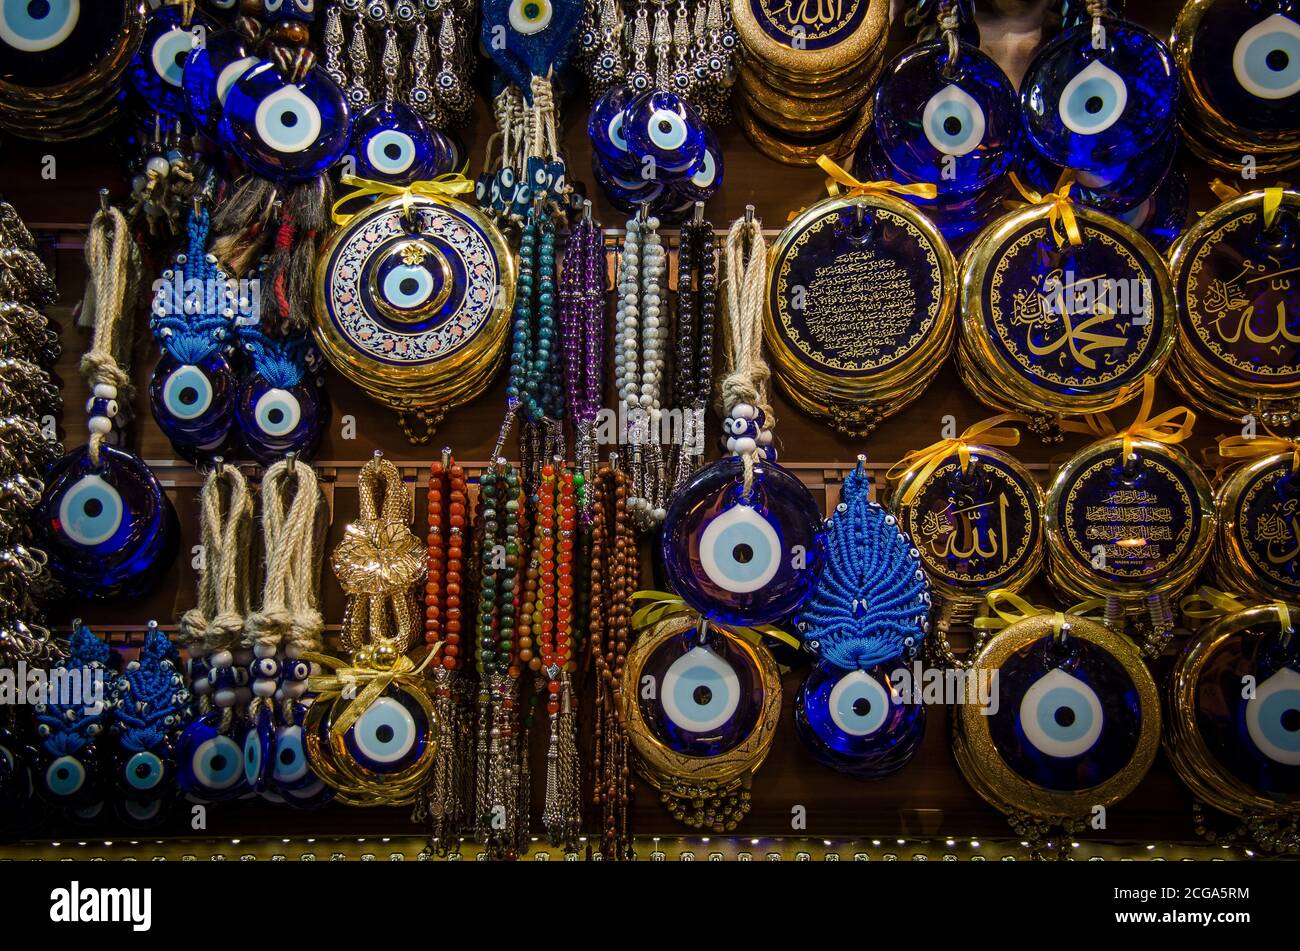 Turkish nazar boncuğu. and amulet to ward off the evil eye and bring good luck. Stock Photo